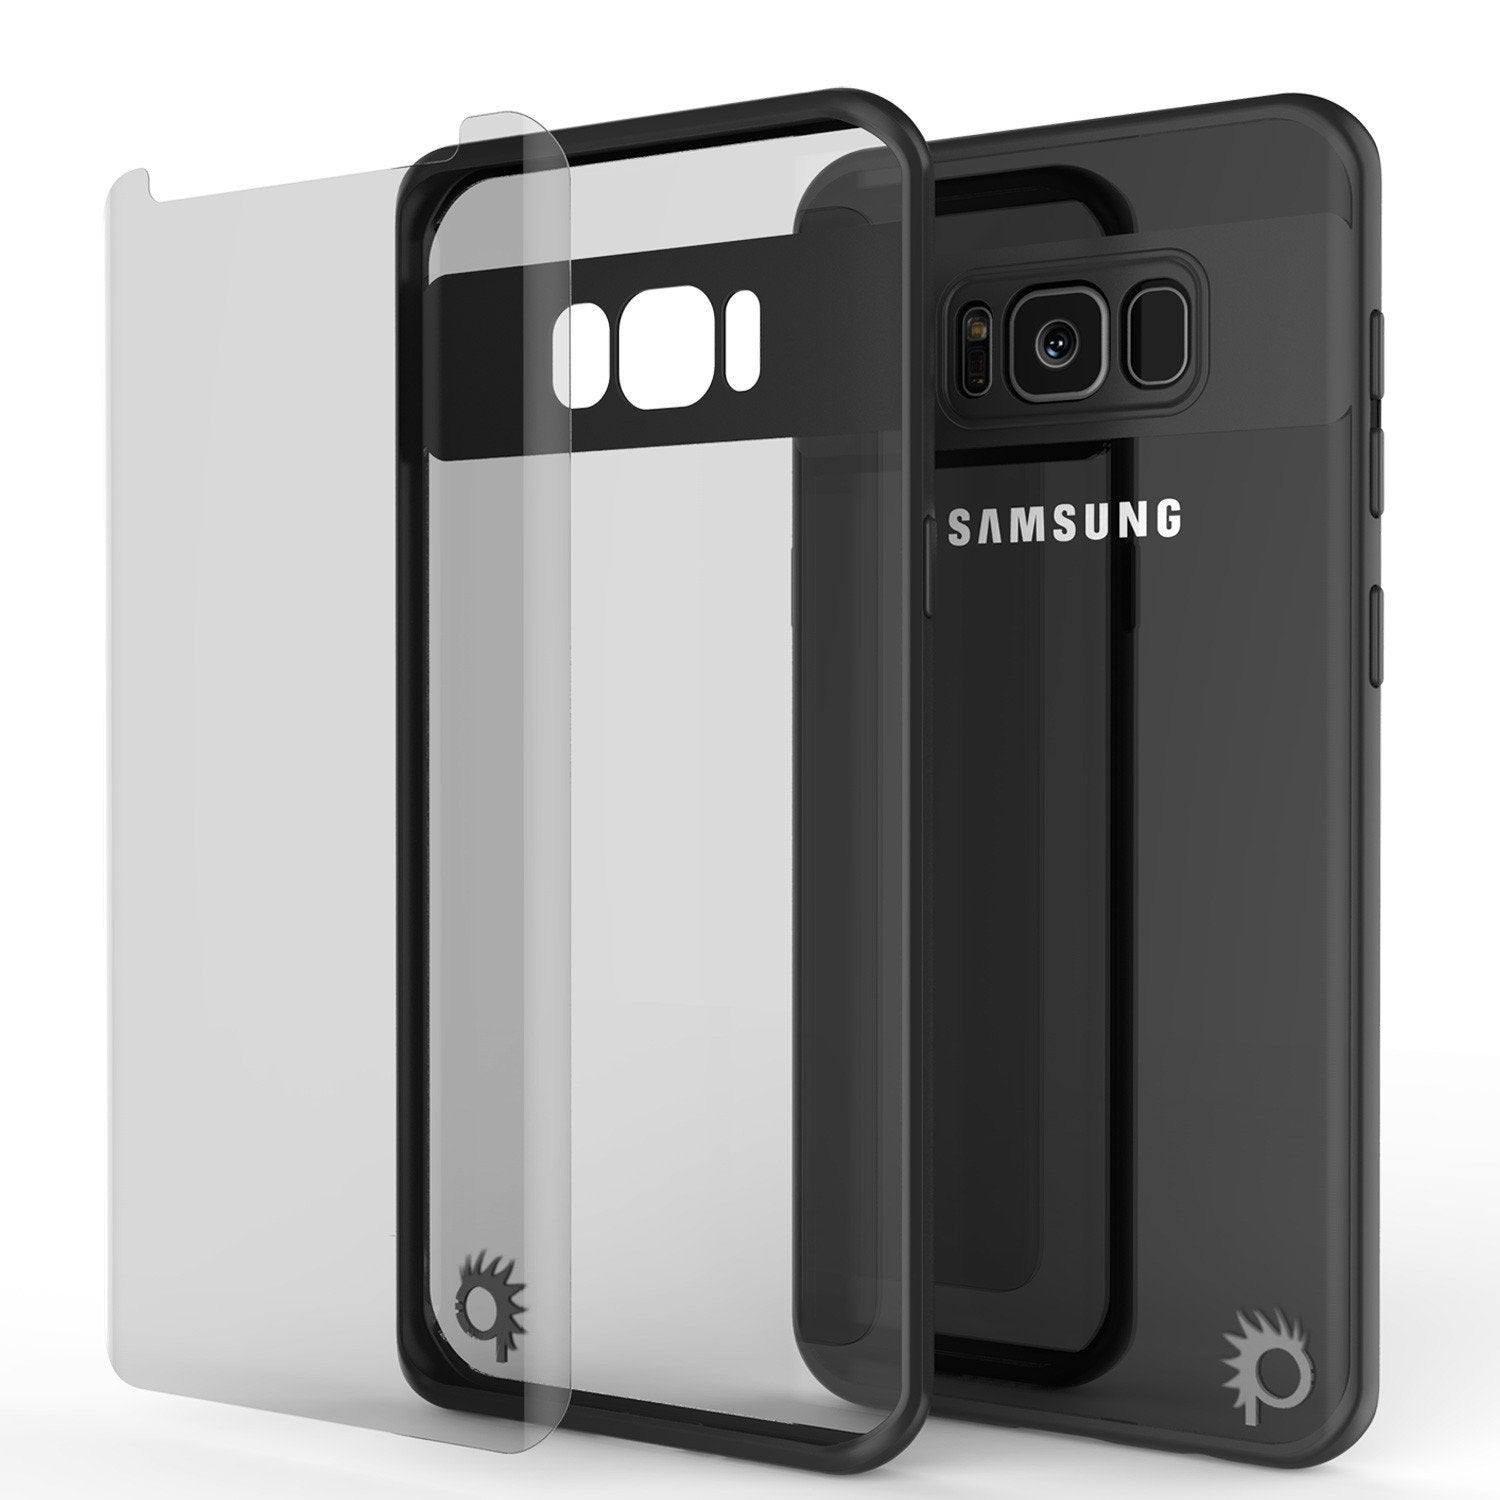 Galaxy S8 Plus Case, Punkcase [MASK Series] [BLACK] Full Body Hybrid Dual Layer TPU Cover W/ Protective PUNKSHIELD Screen Protector - PunkCase NZ